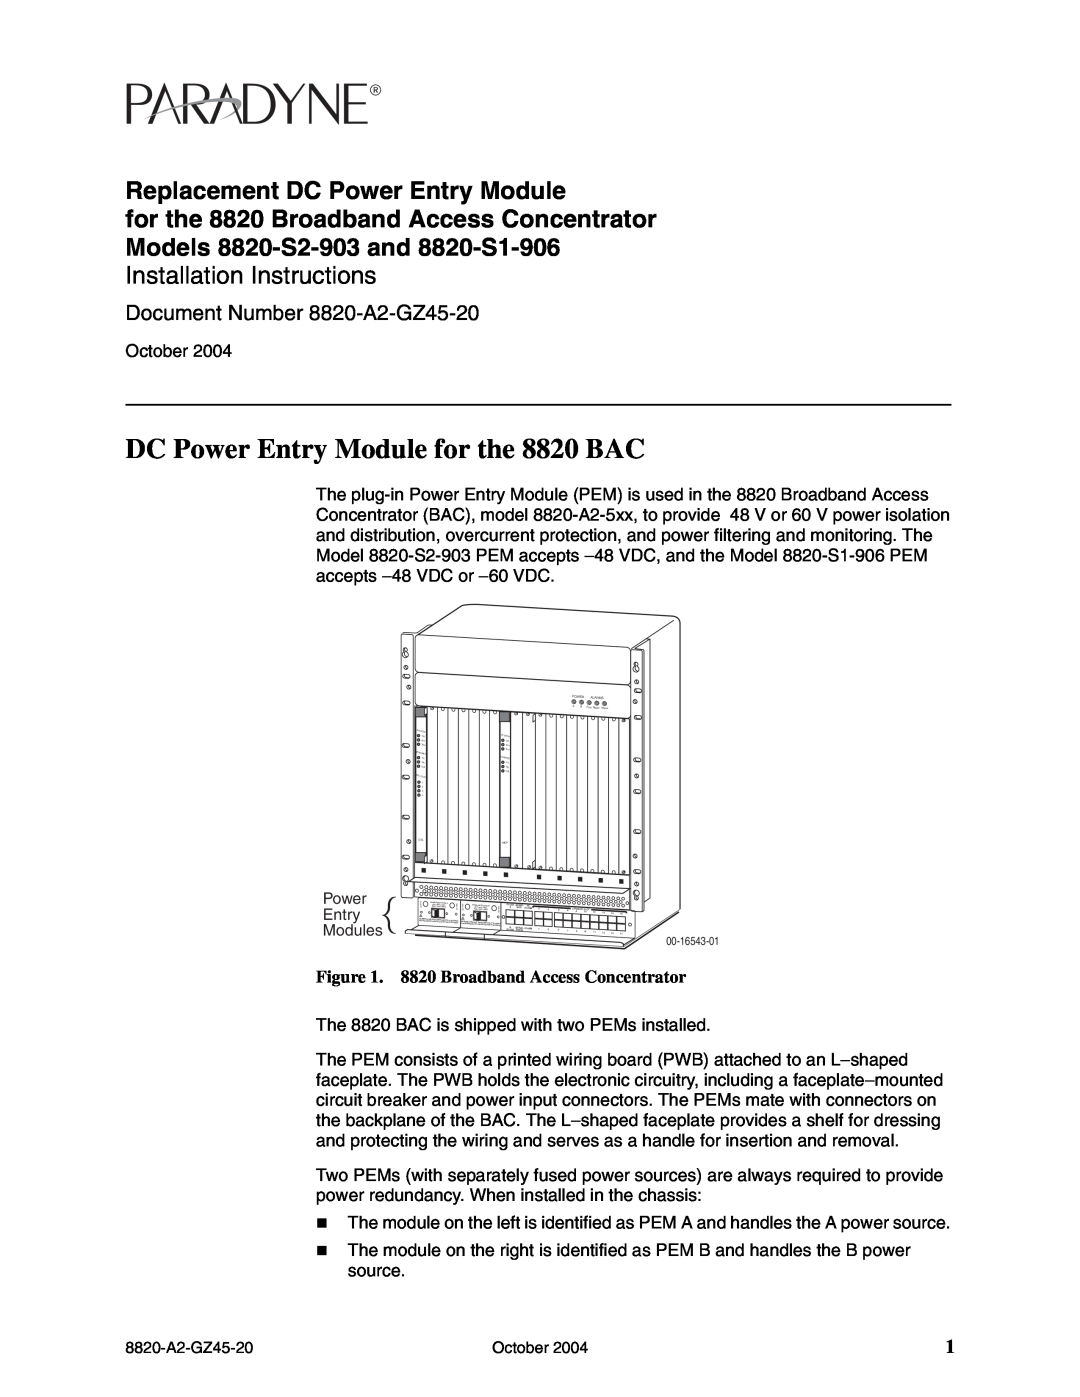 Paradyne 8820-S1-906 installation instructions DC Power Entry Module for the 8820 BAC, 8820 Broadband Access Concentrator 